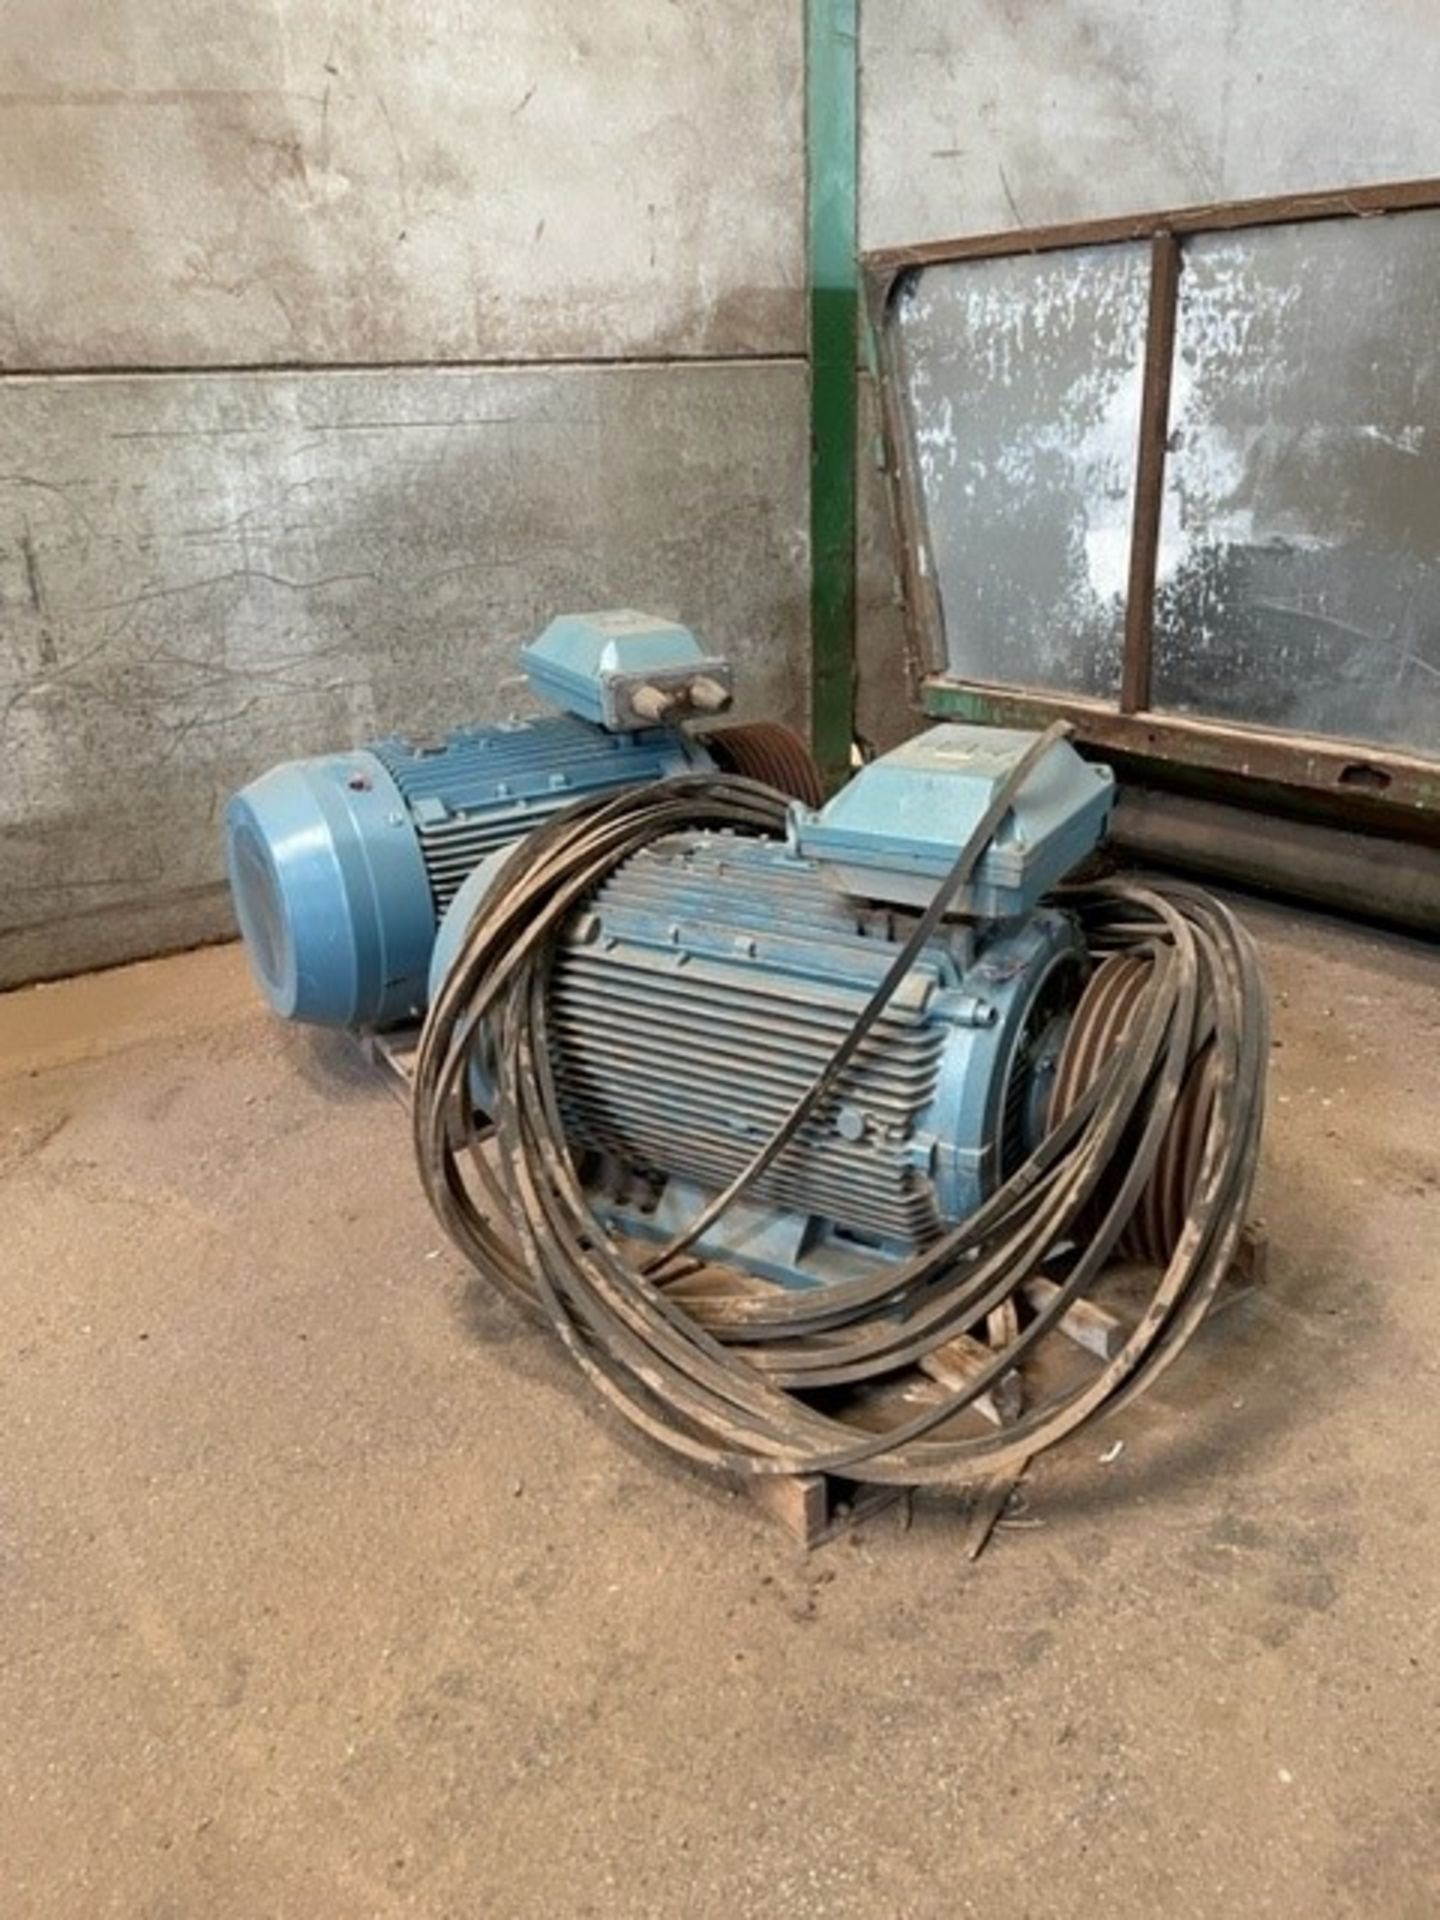 ABB Foot Mounted TEFC Electric Motor, 200kW 1845rpm. Lot located in Lincoln, Lincolnshire Please - Image 3 of 4